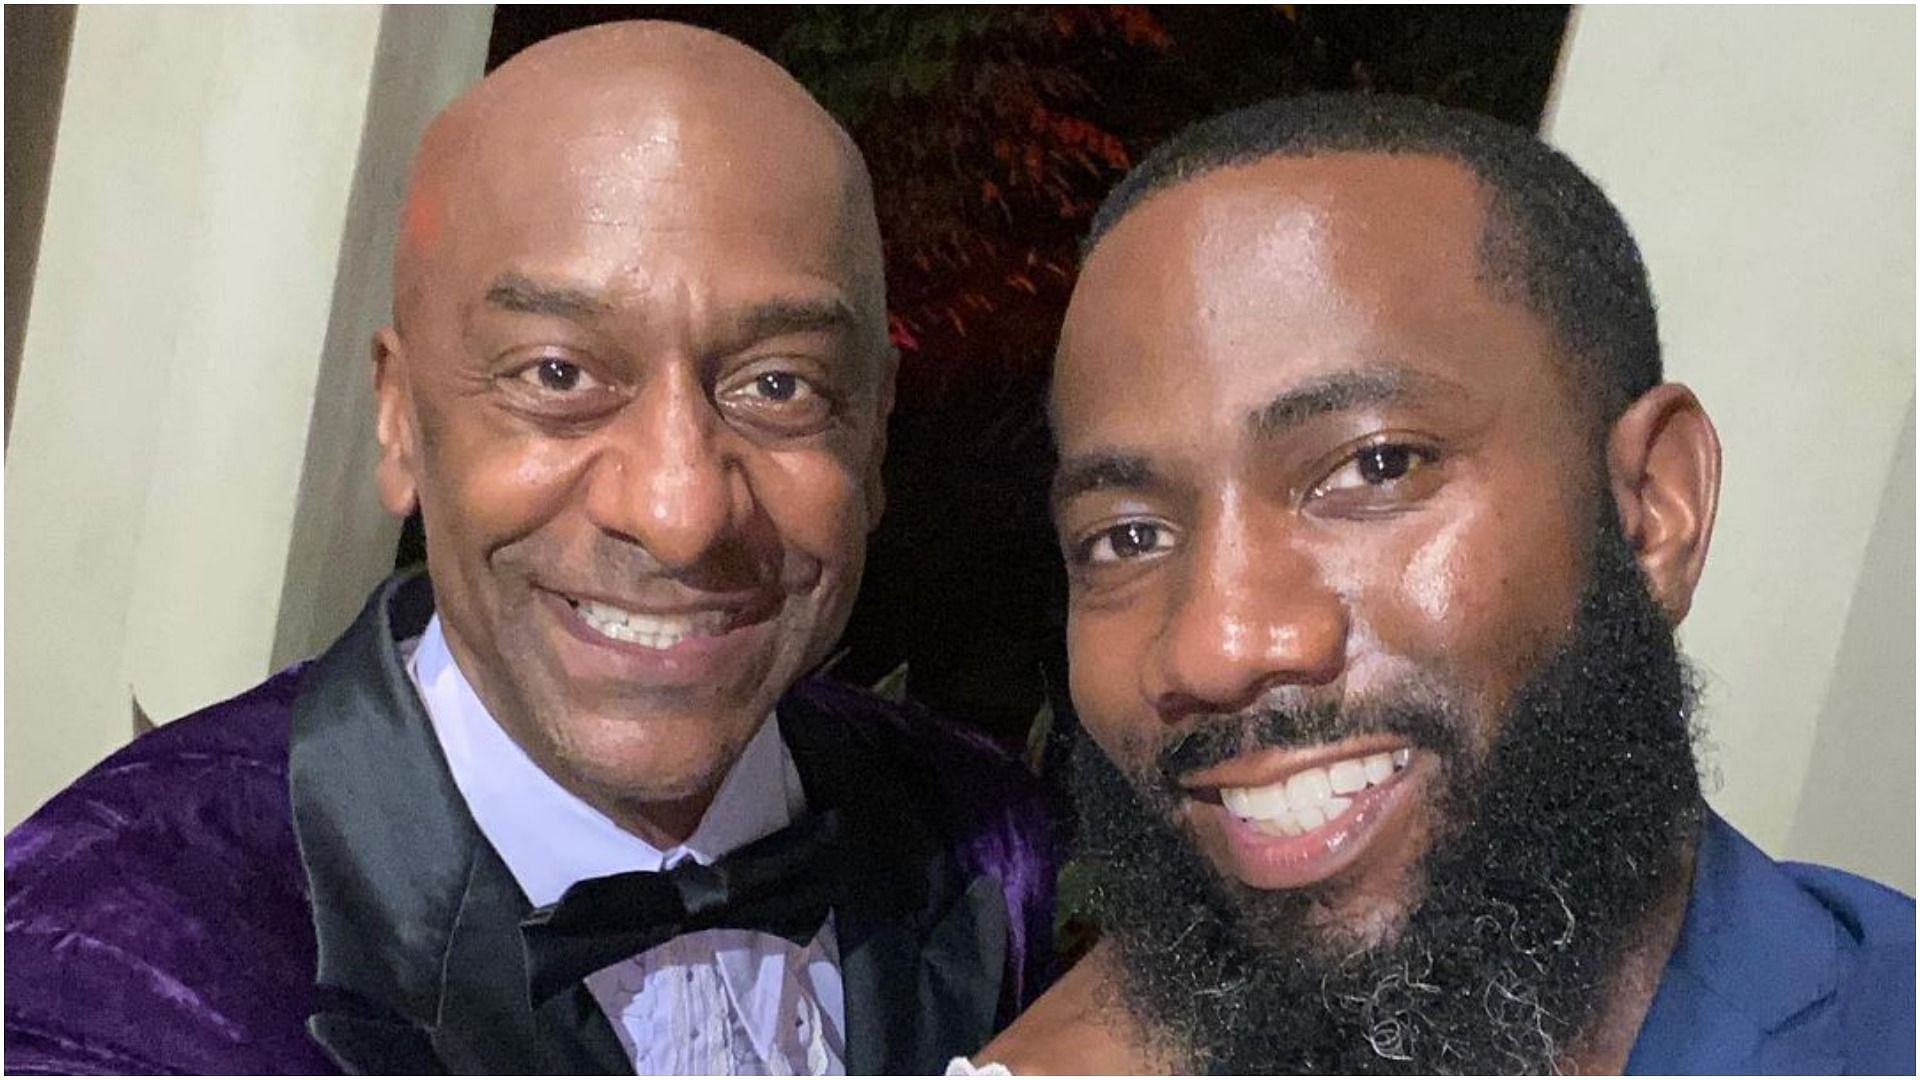 Stephen Hill with one of his friends. (Image via stephengranthill/Instagram)